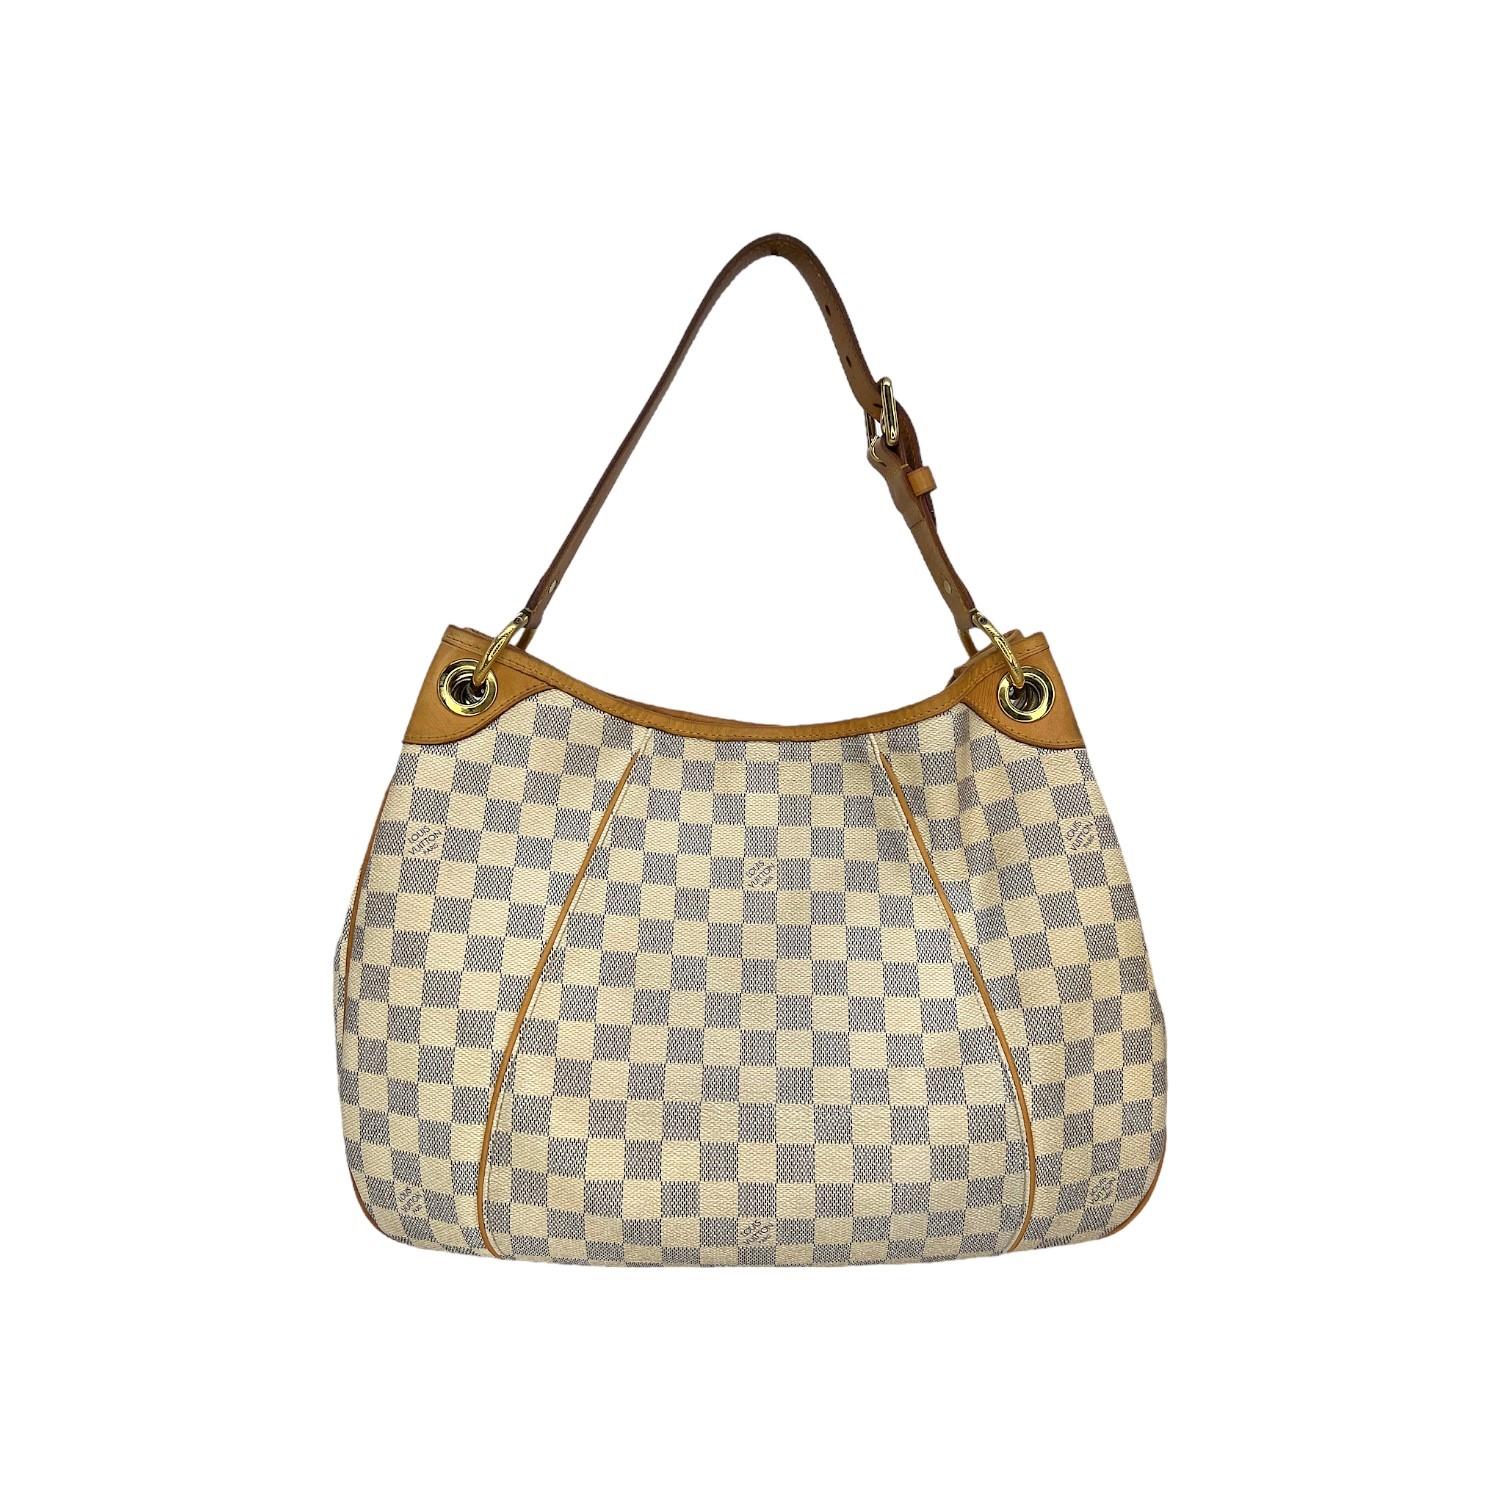 This Louis Vuitton Galleria PM was made in the USA and it is crafted of the Louis Vuitton Damier Azur coated canvas exterior with leather trimming and gold-tone hardware features. It features a magnetic snap closure that opens up to an Alcantara